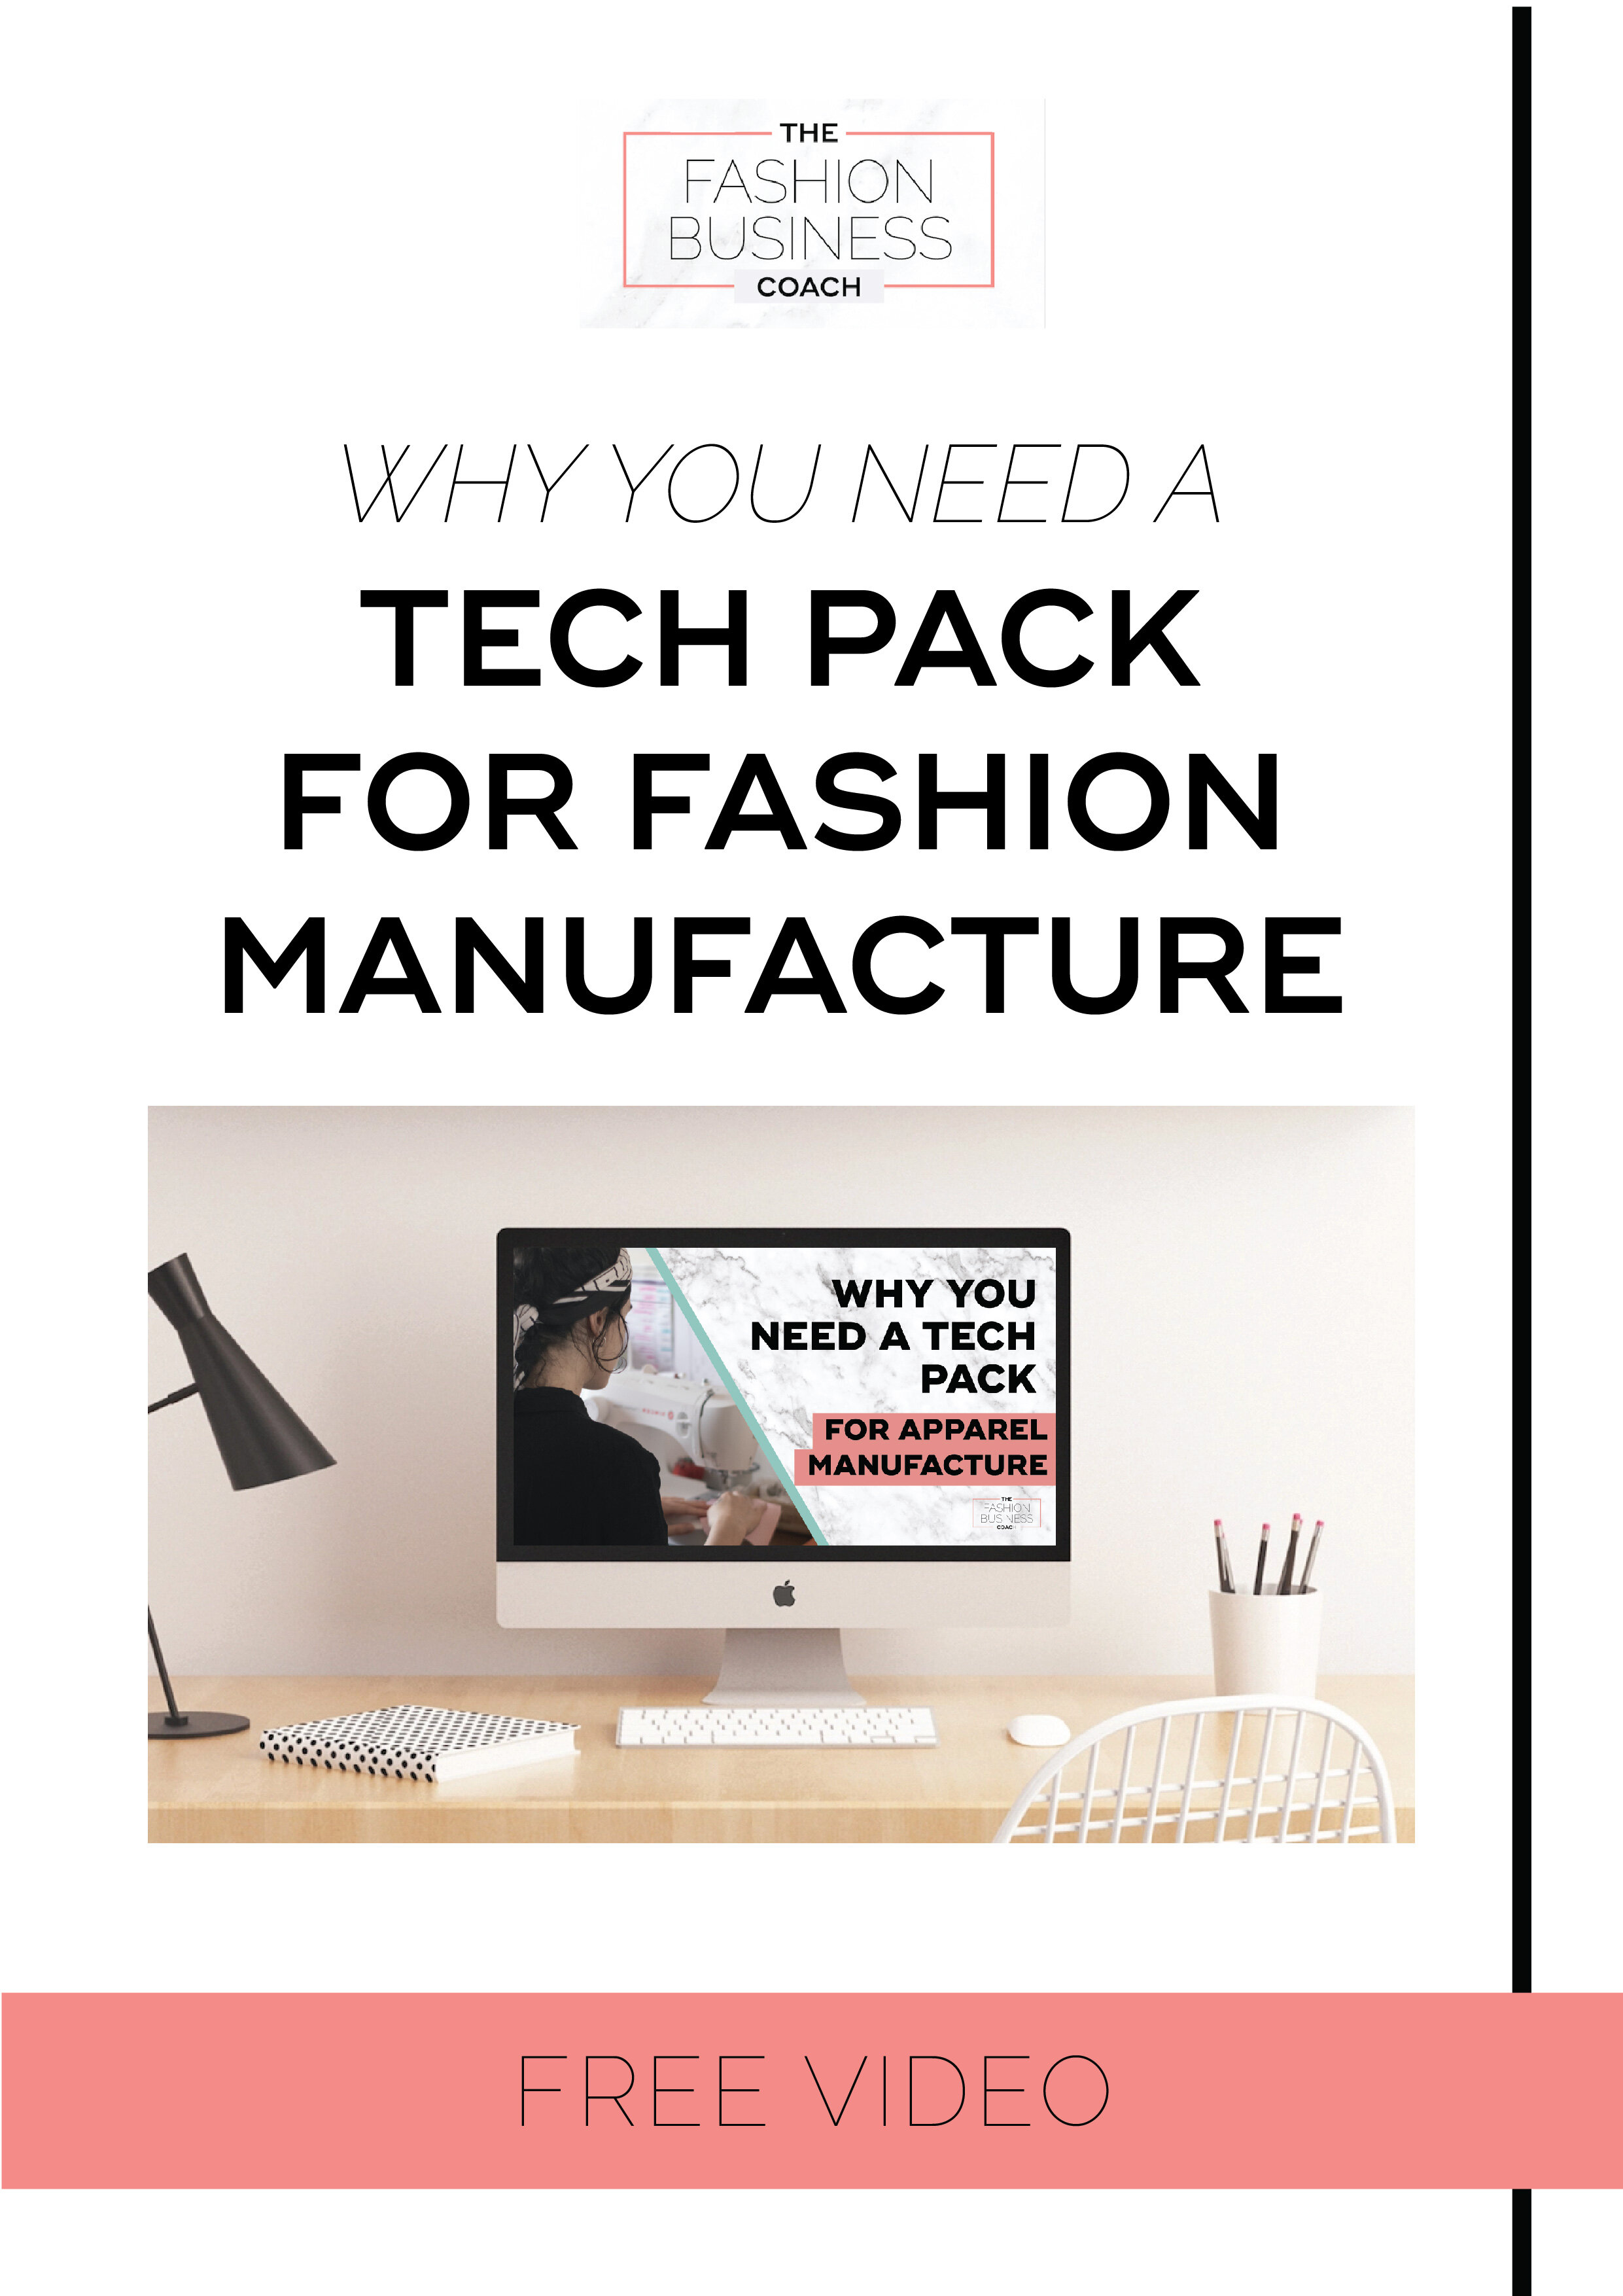 Why You Need a tech pack for fashion manufacture video.jpg